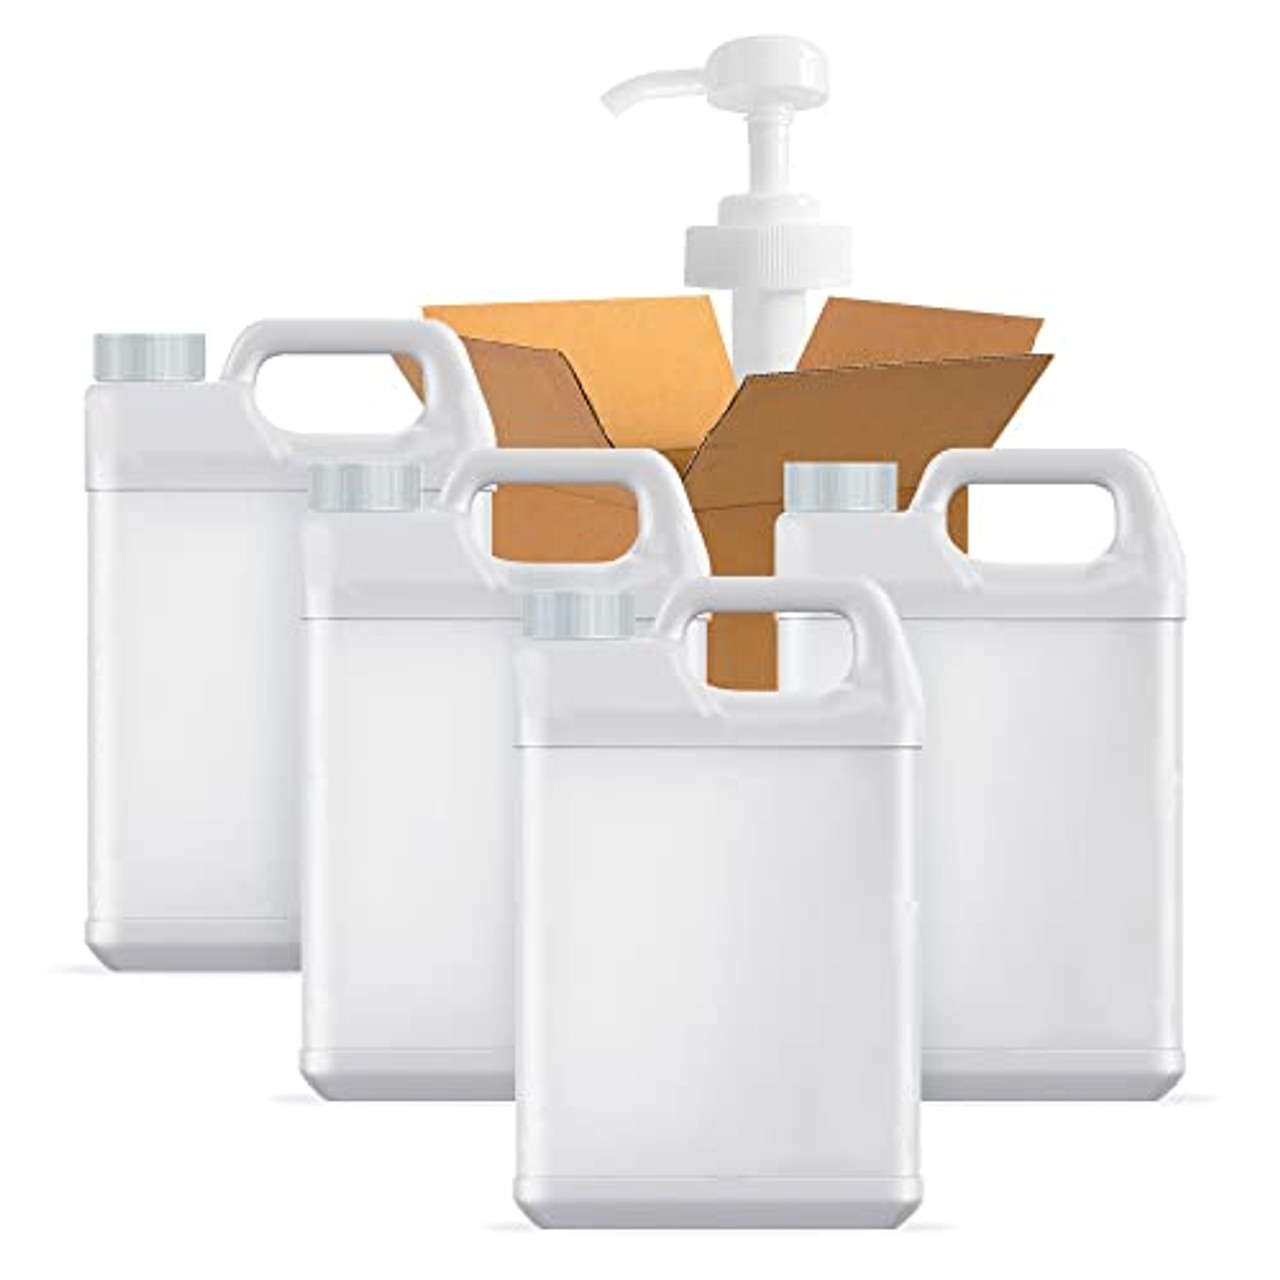 2.5 Gallon Water Jug, F-Style Plastic Jug, Water Storage Containers, Hdpe  Containers with Leakproof Cap (4 Pack)